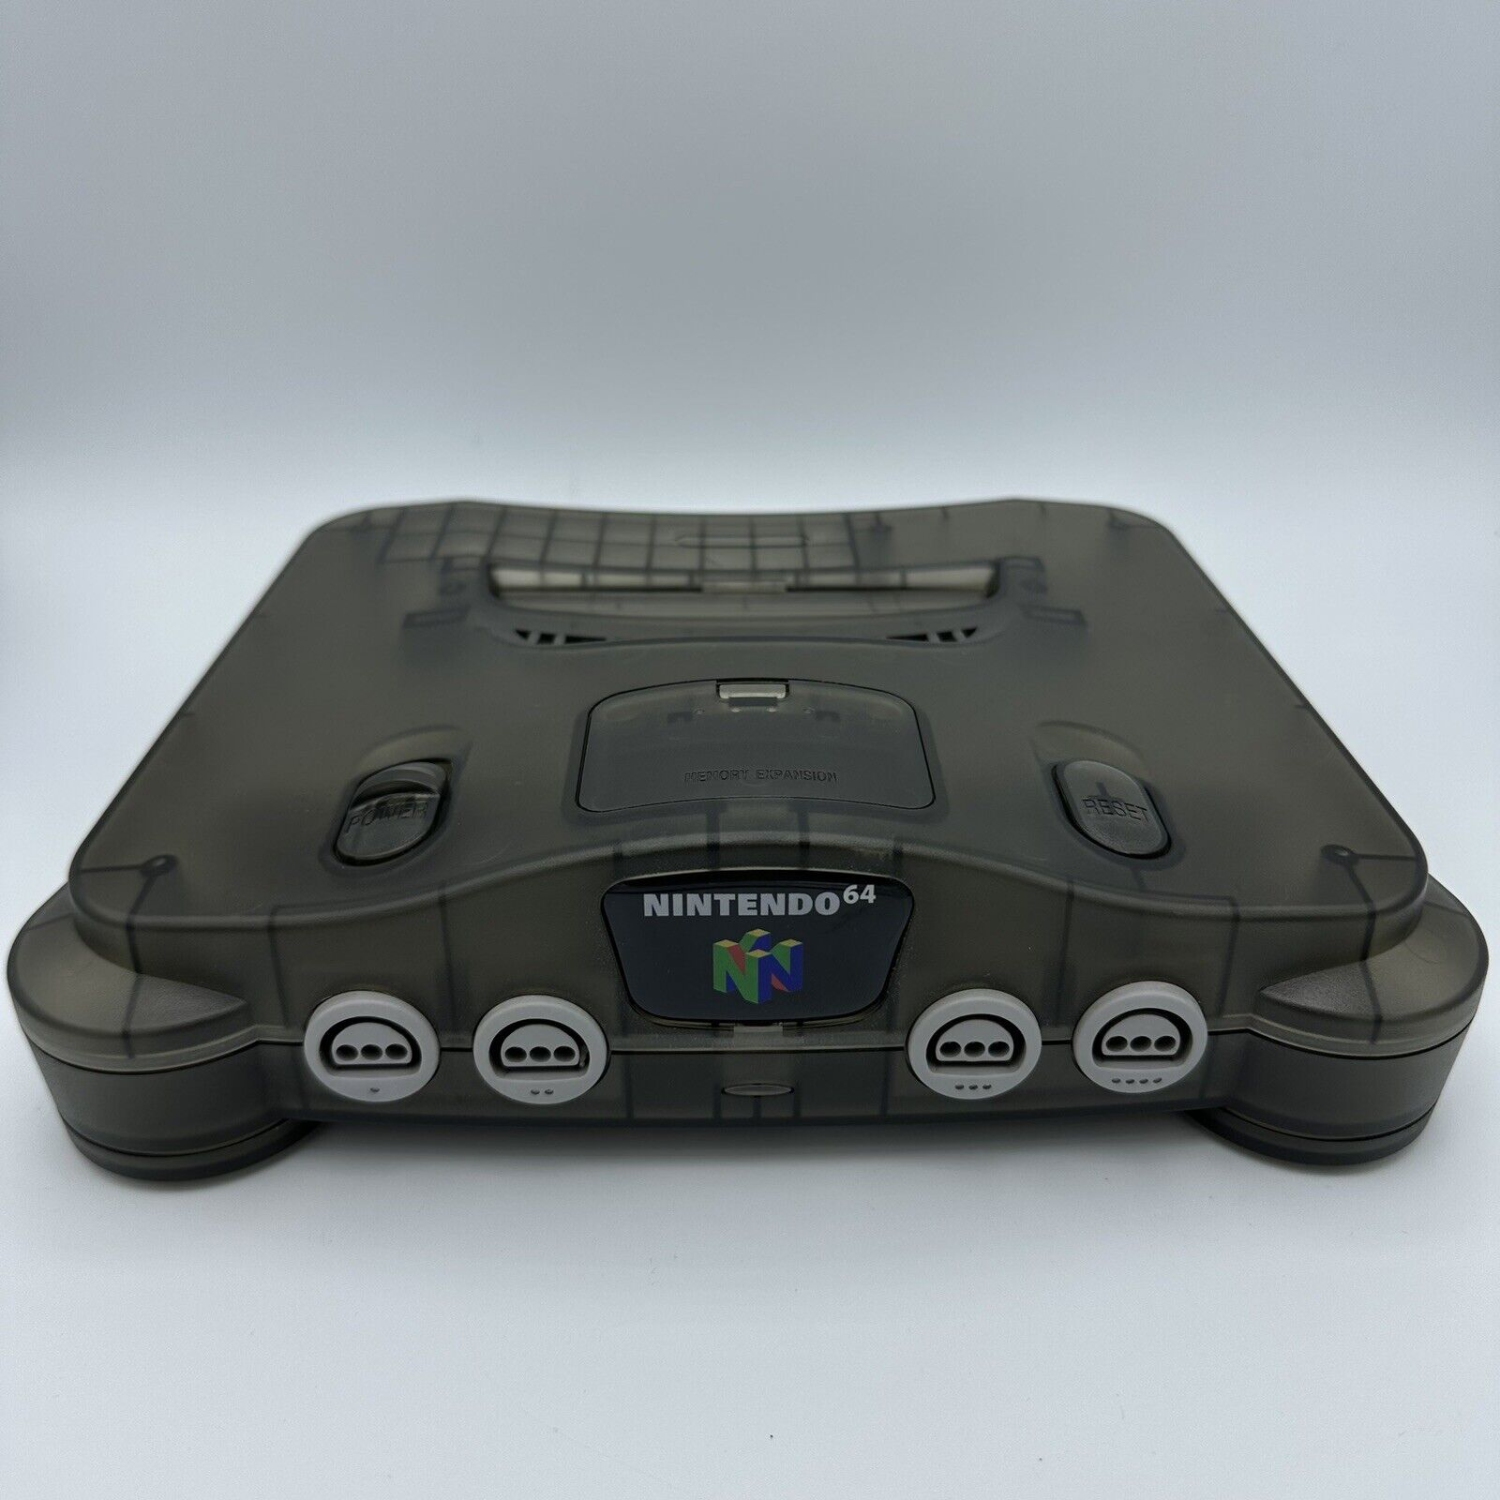 NINTENDO 64 CONSOLE Pre-Owned Refurbished Excellent Authentic Nintendo 64 N64 Translucent Clear Grey Region Free USA&JP